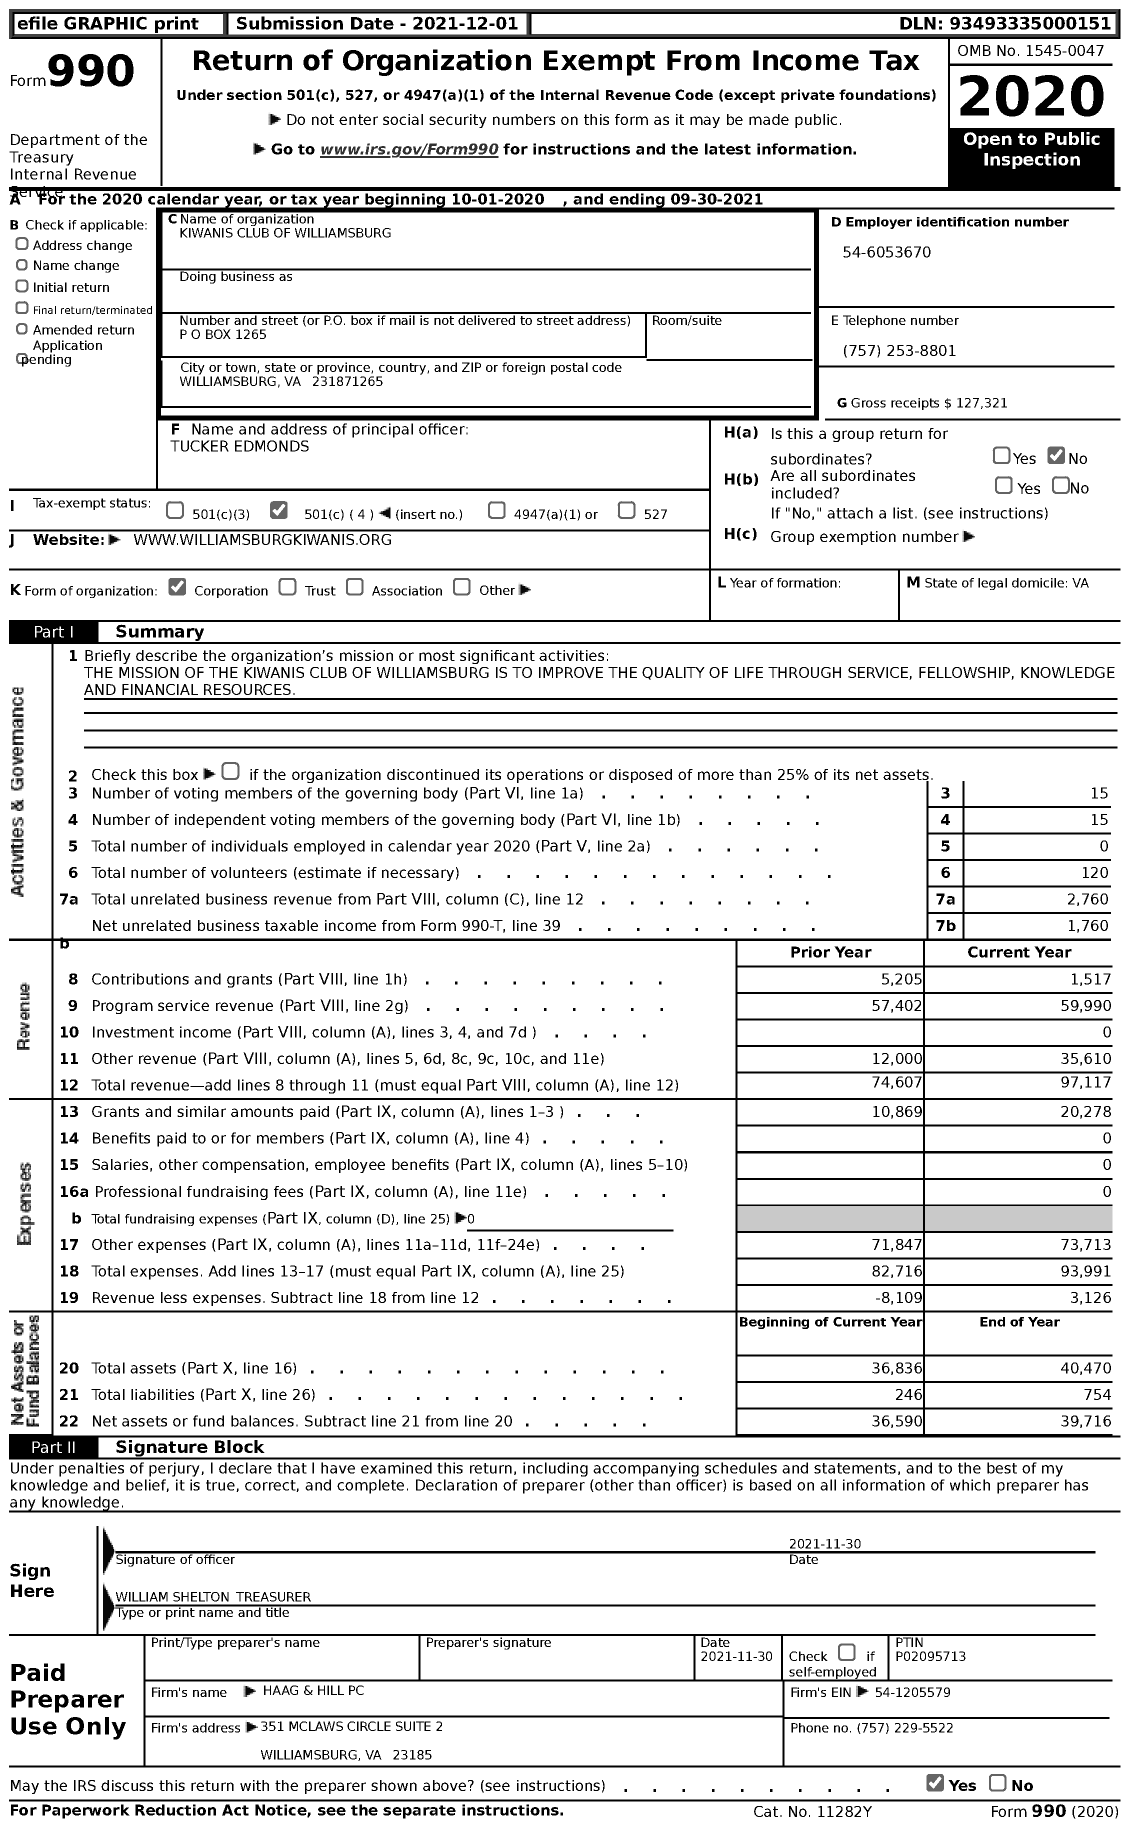 Image of first page of 2020 Form 990 for Kiwanis International - Attention Bill Shelton Treasurer